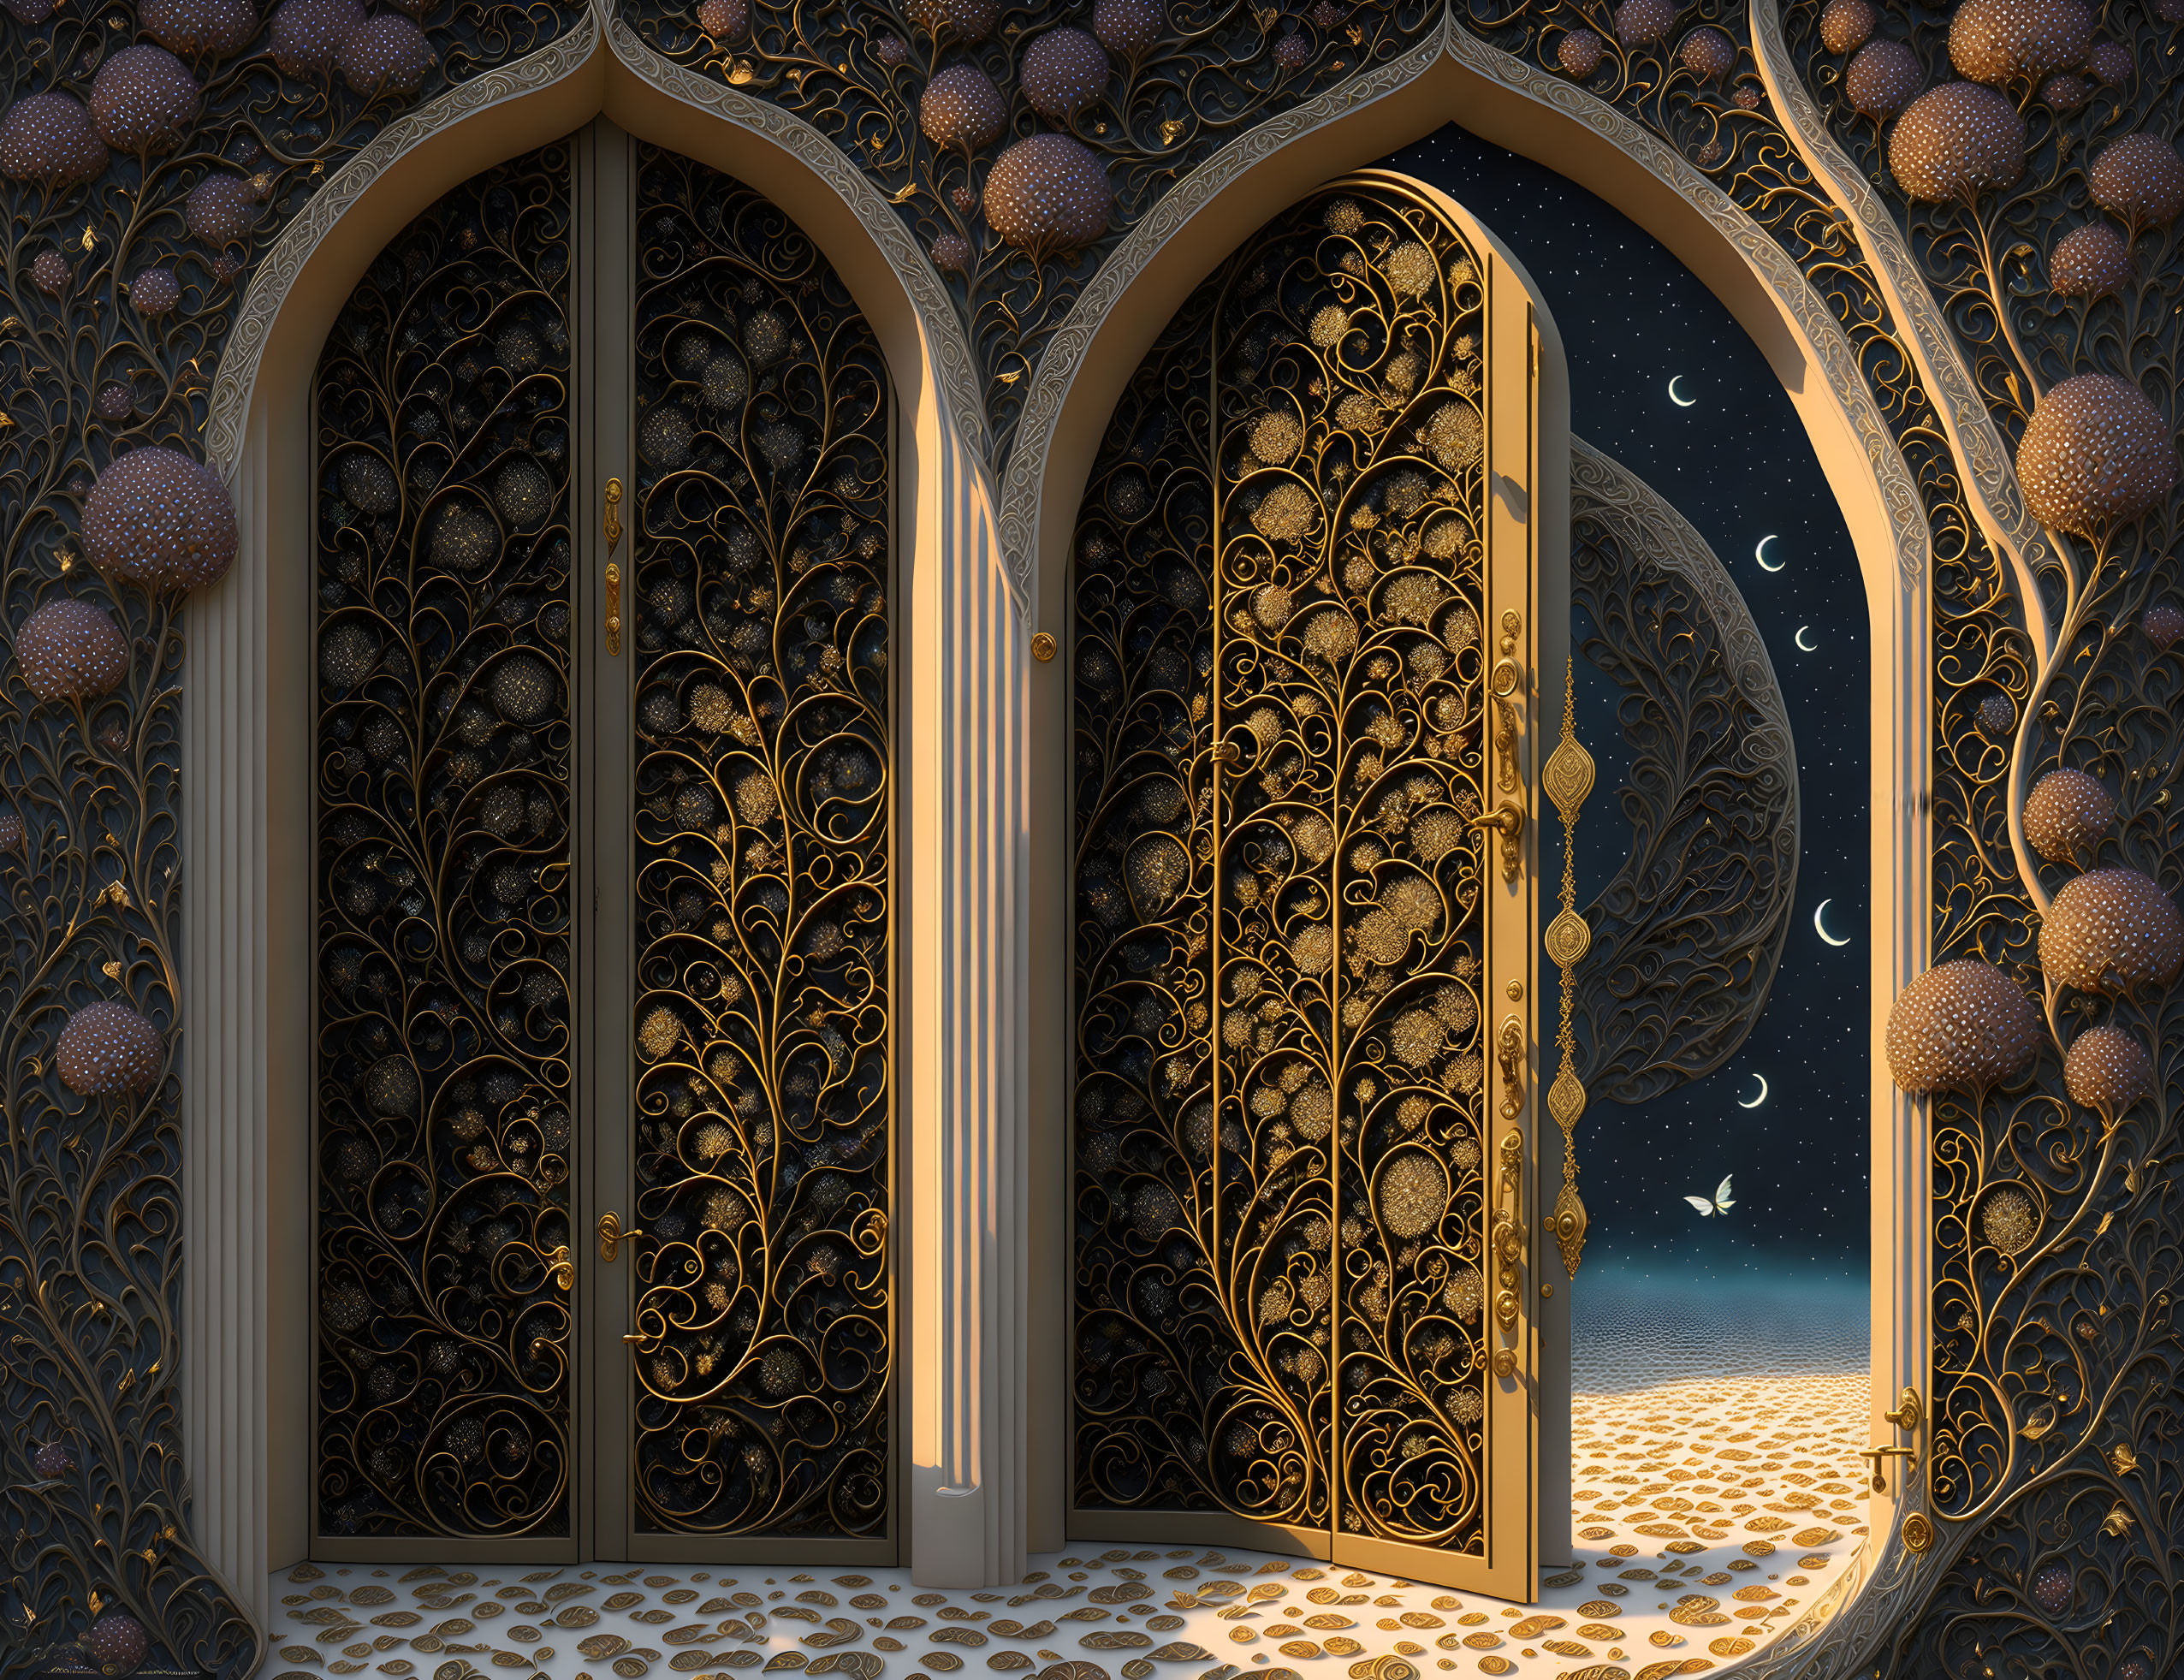 Ornate gold and bronze double door with night sky and floating lantern-like spheres